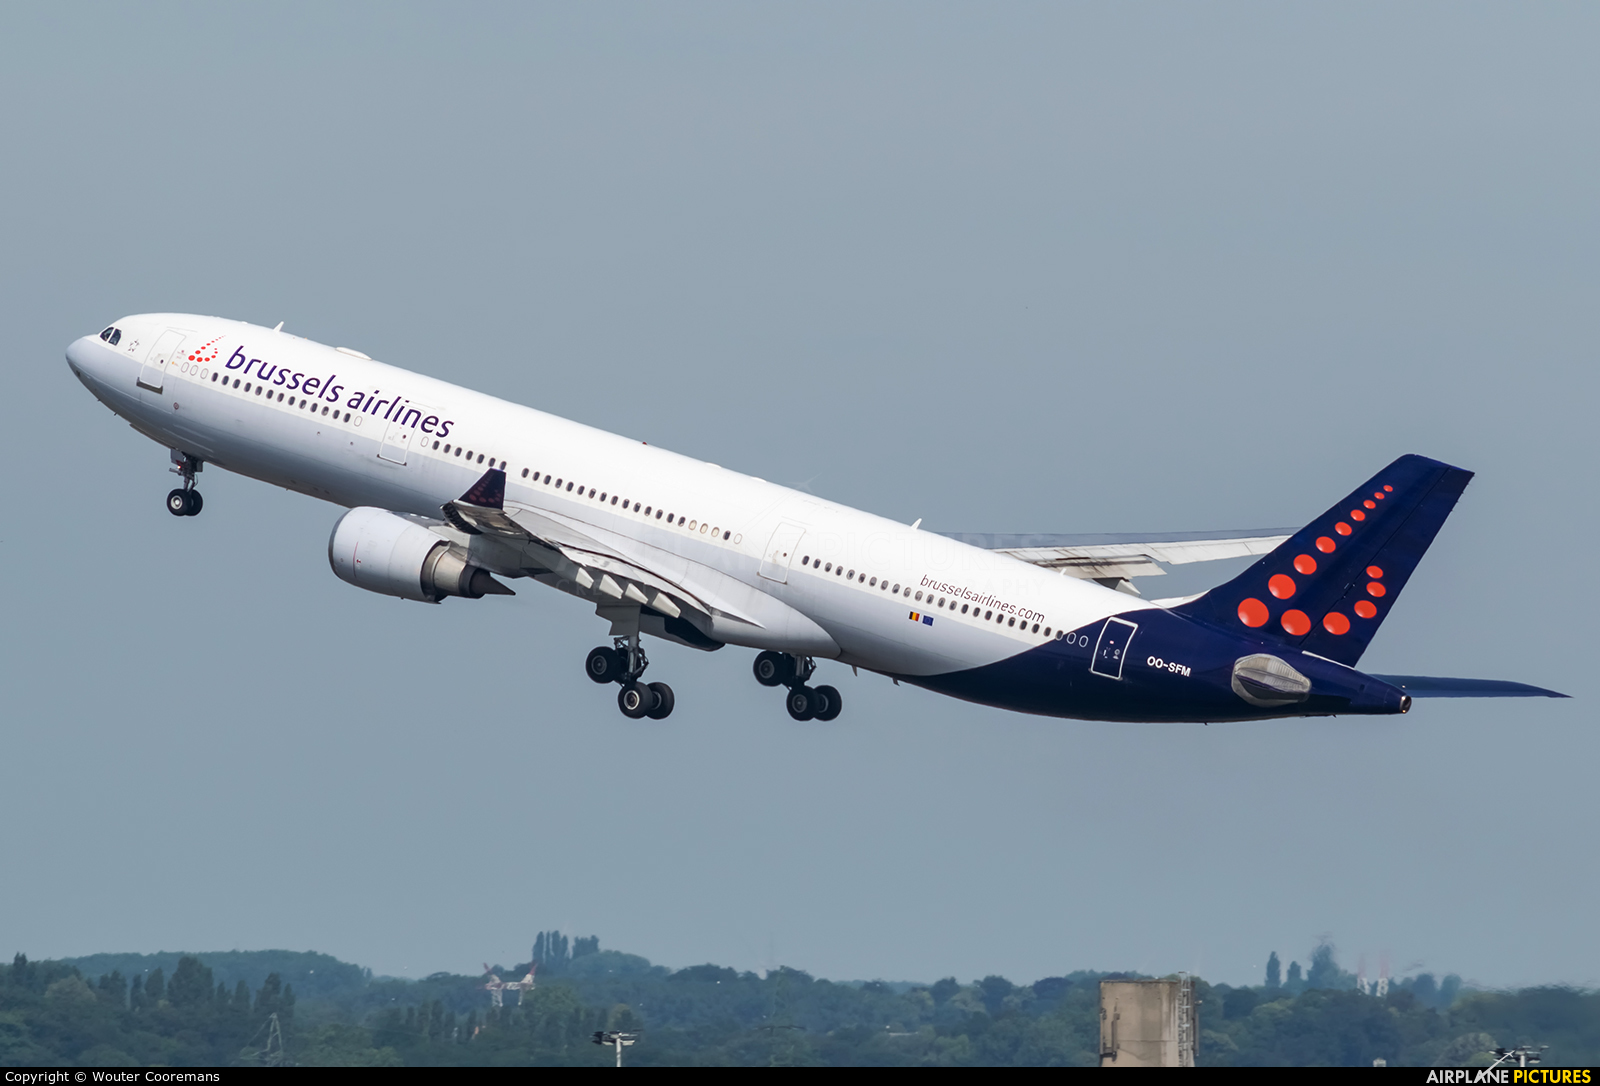 Oo Sfm Brussels Airlines Airbus A330 300 At Brussels Zaventem